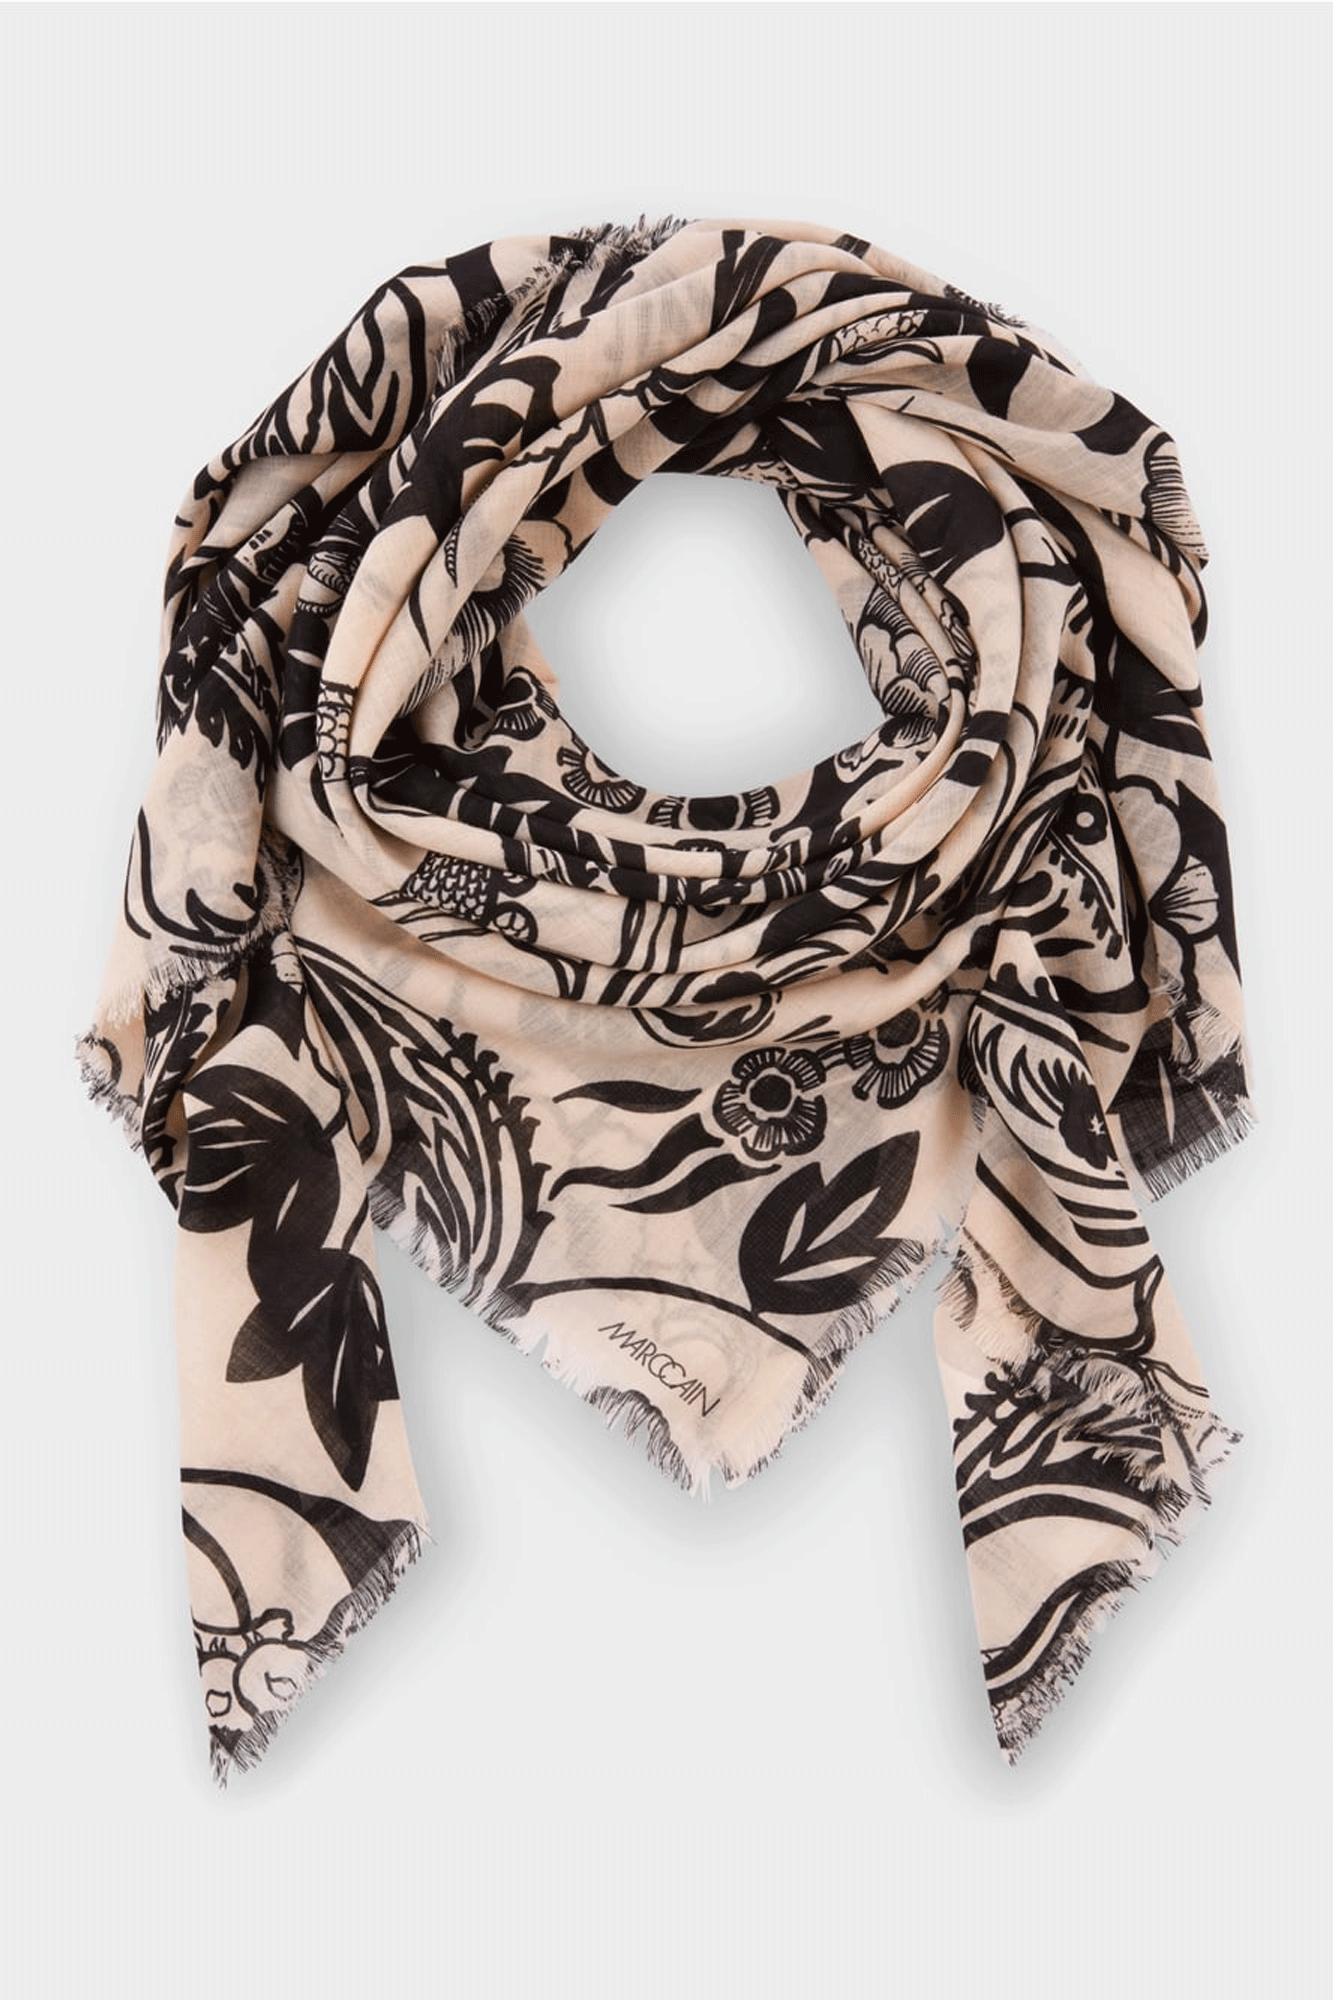 This Almond Blossom Scarf from Marc Cain is made of lightweight and loosely woven woollen yarn for a comfortable fit. The intricate print is inspired by mysterious tattoo designs featuring intertwined flora and dragon motifs. Its fringed edges provide a sophisticated finishing touch.